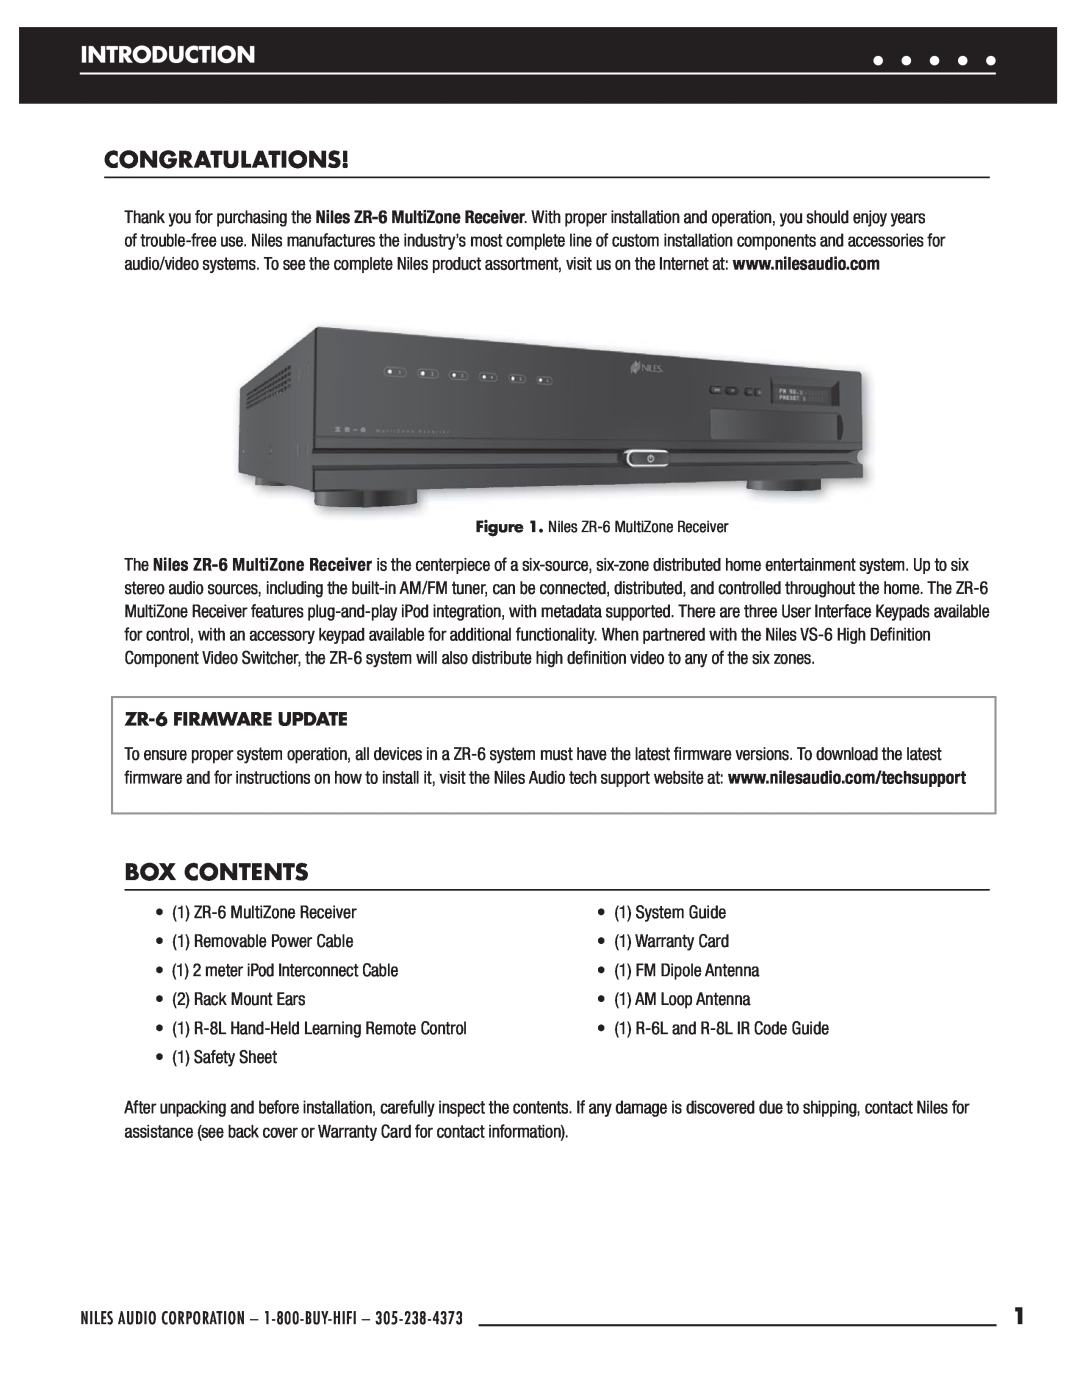 Niles Audio manual Introduction, Congratulations, Box Contents, ZR-6FIRMWARE UPDATE 